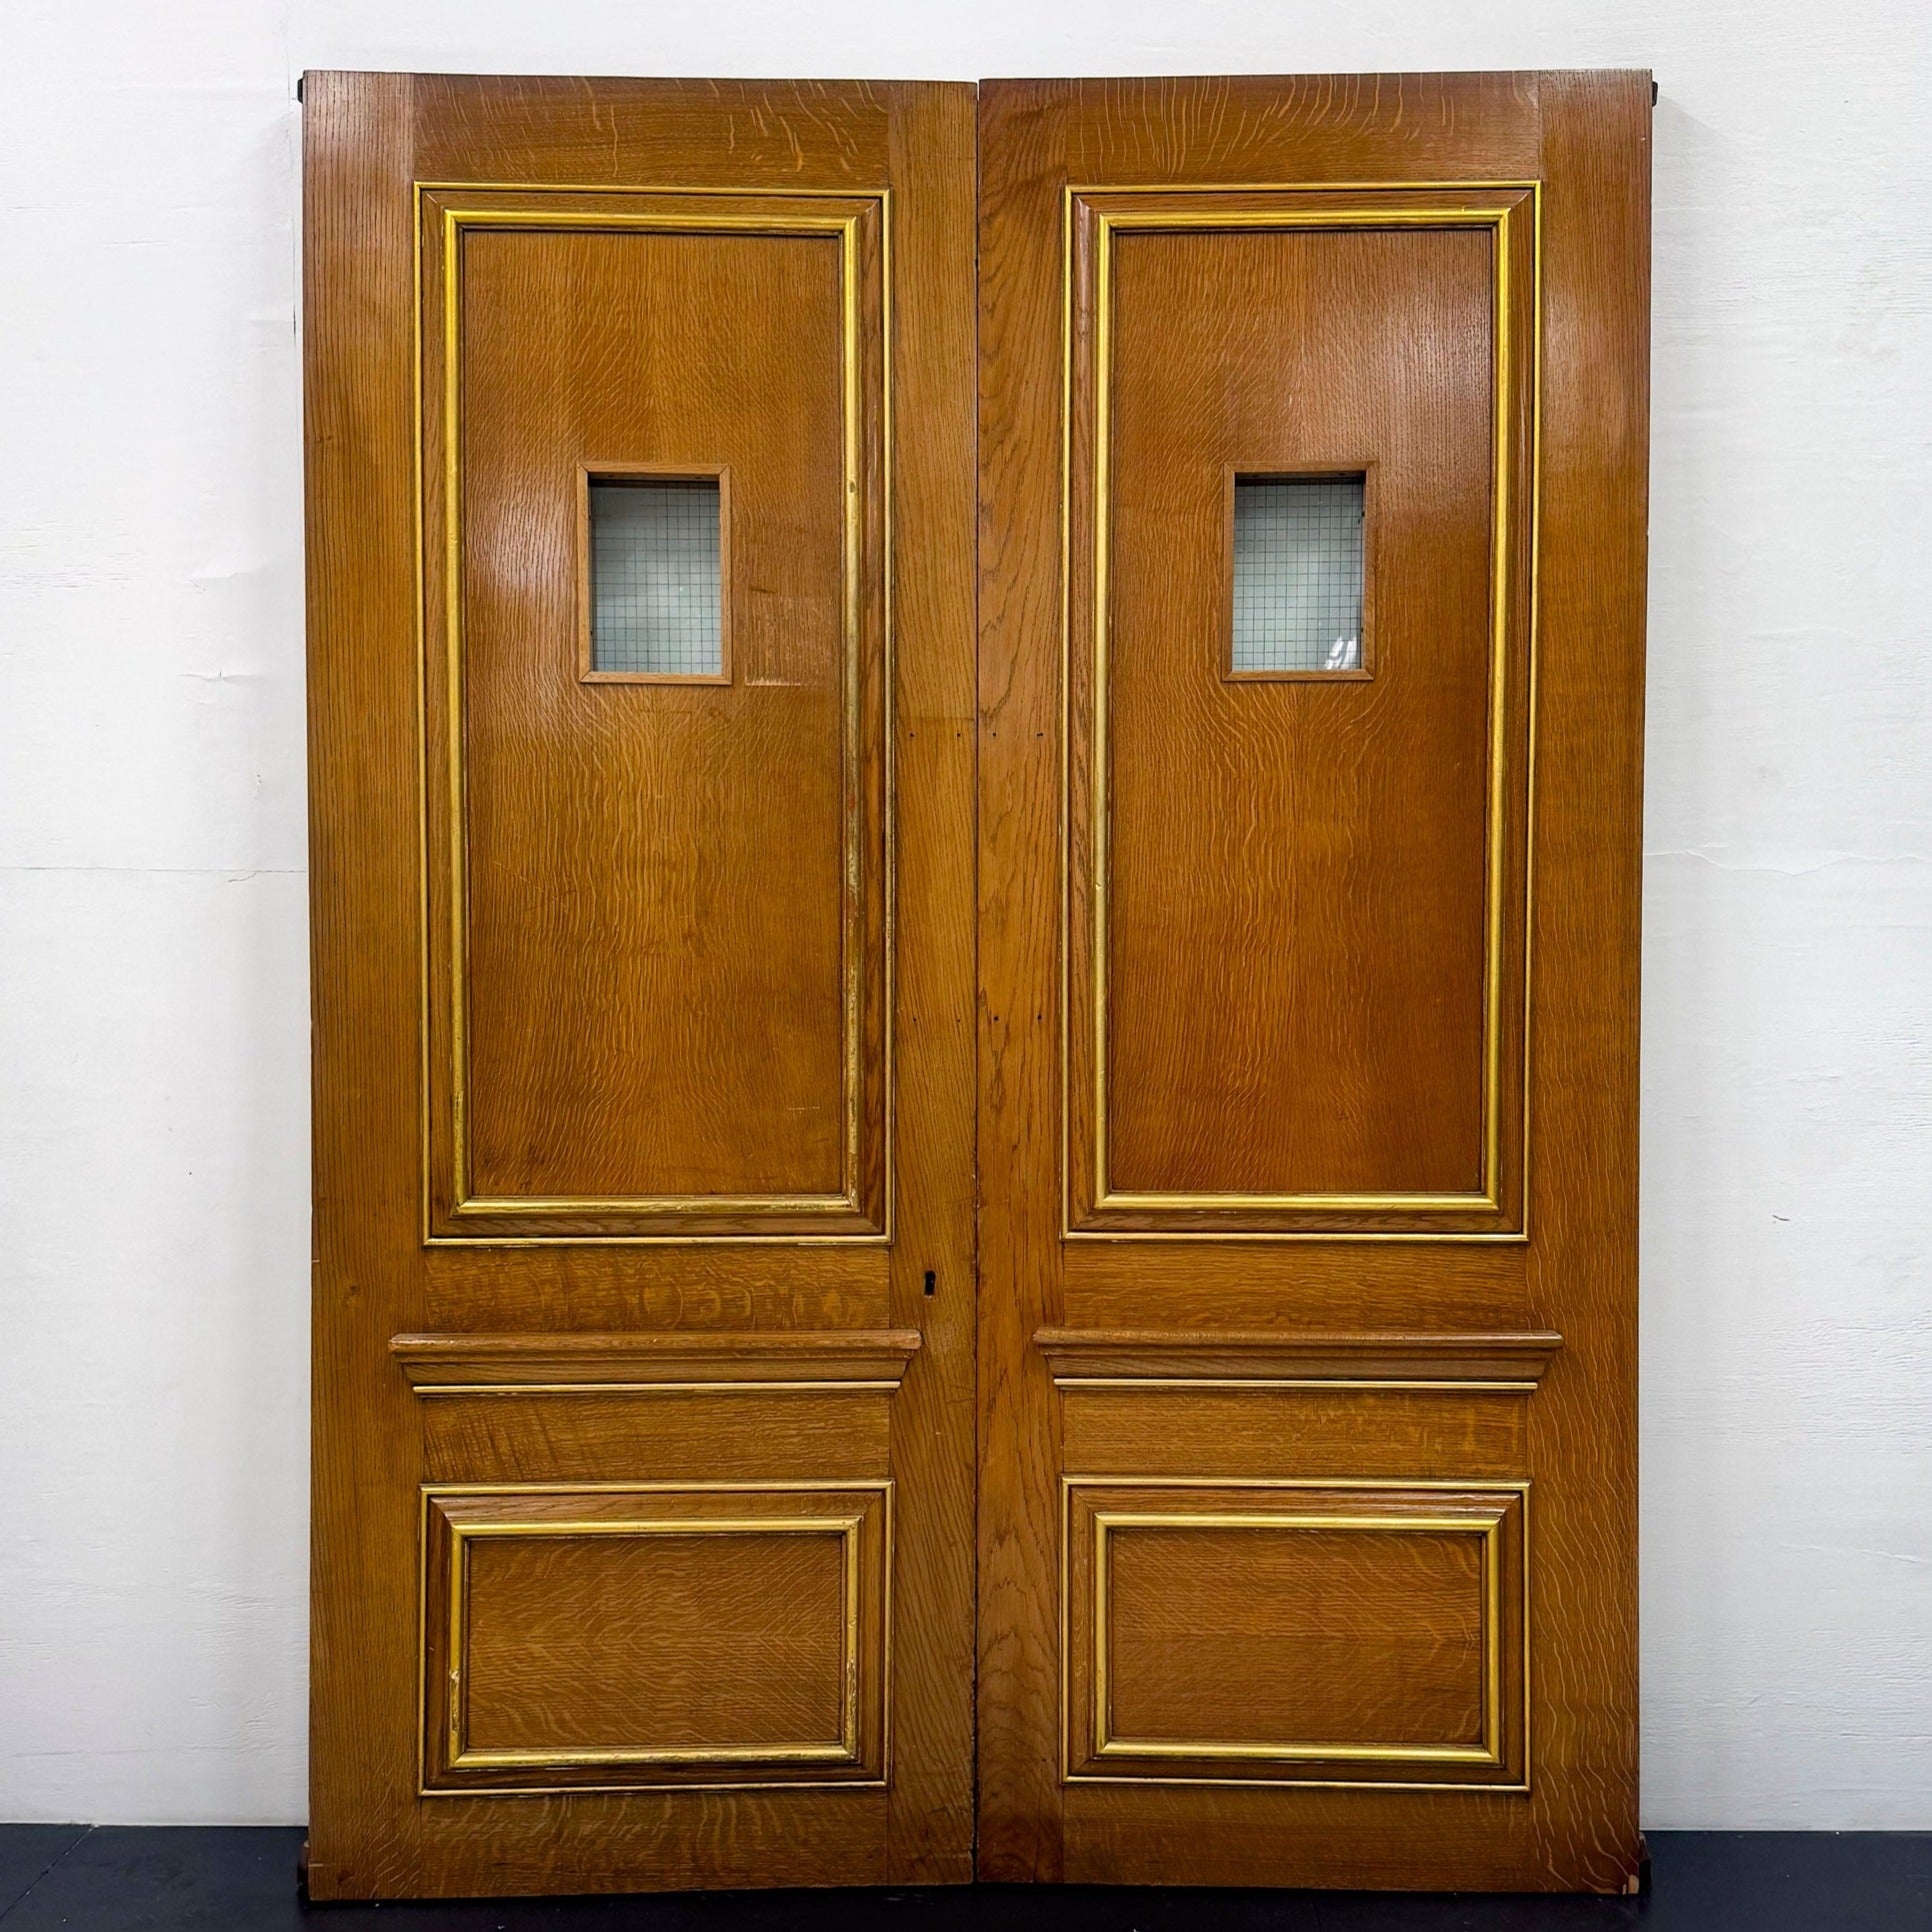 Clothworkers' Pair of Doors with Georgian Wire Viewing Windows - 214.5cm x 157.5cm | The Architectural Forum